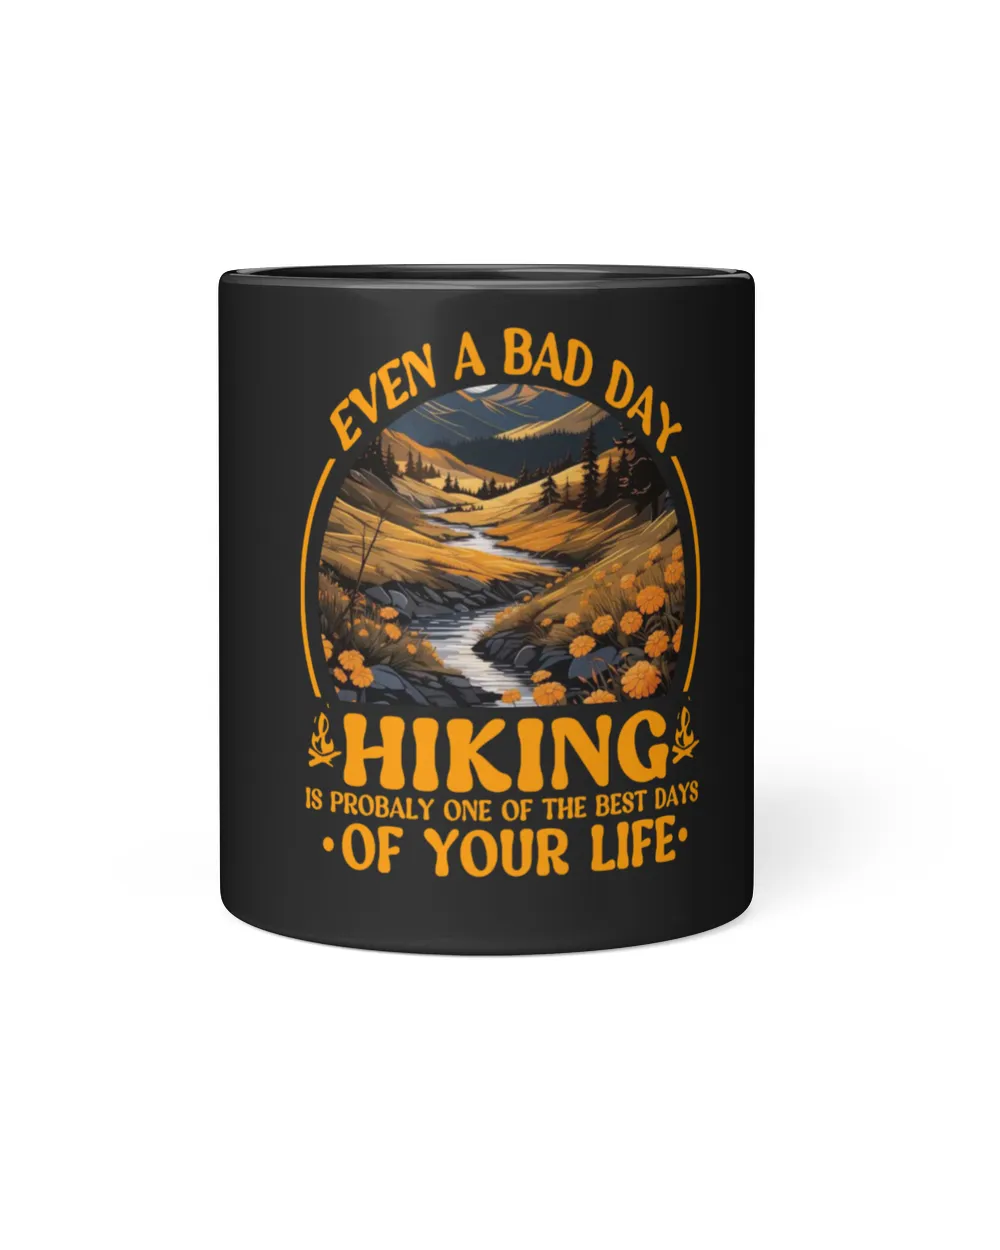 Even A Bad Day Hiking Is Probably One Of The Best Days Of Your Life Mug